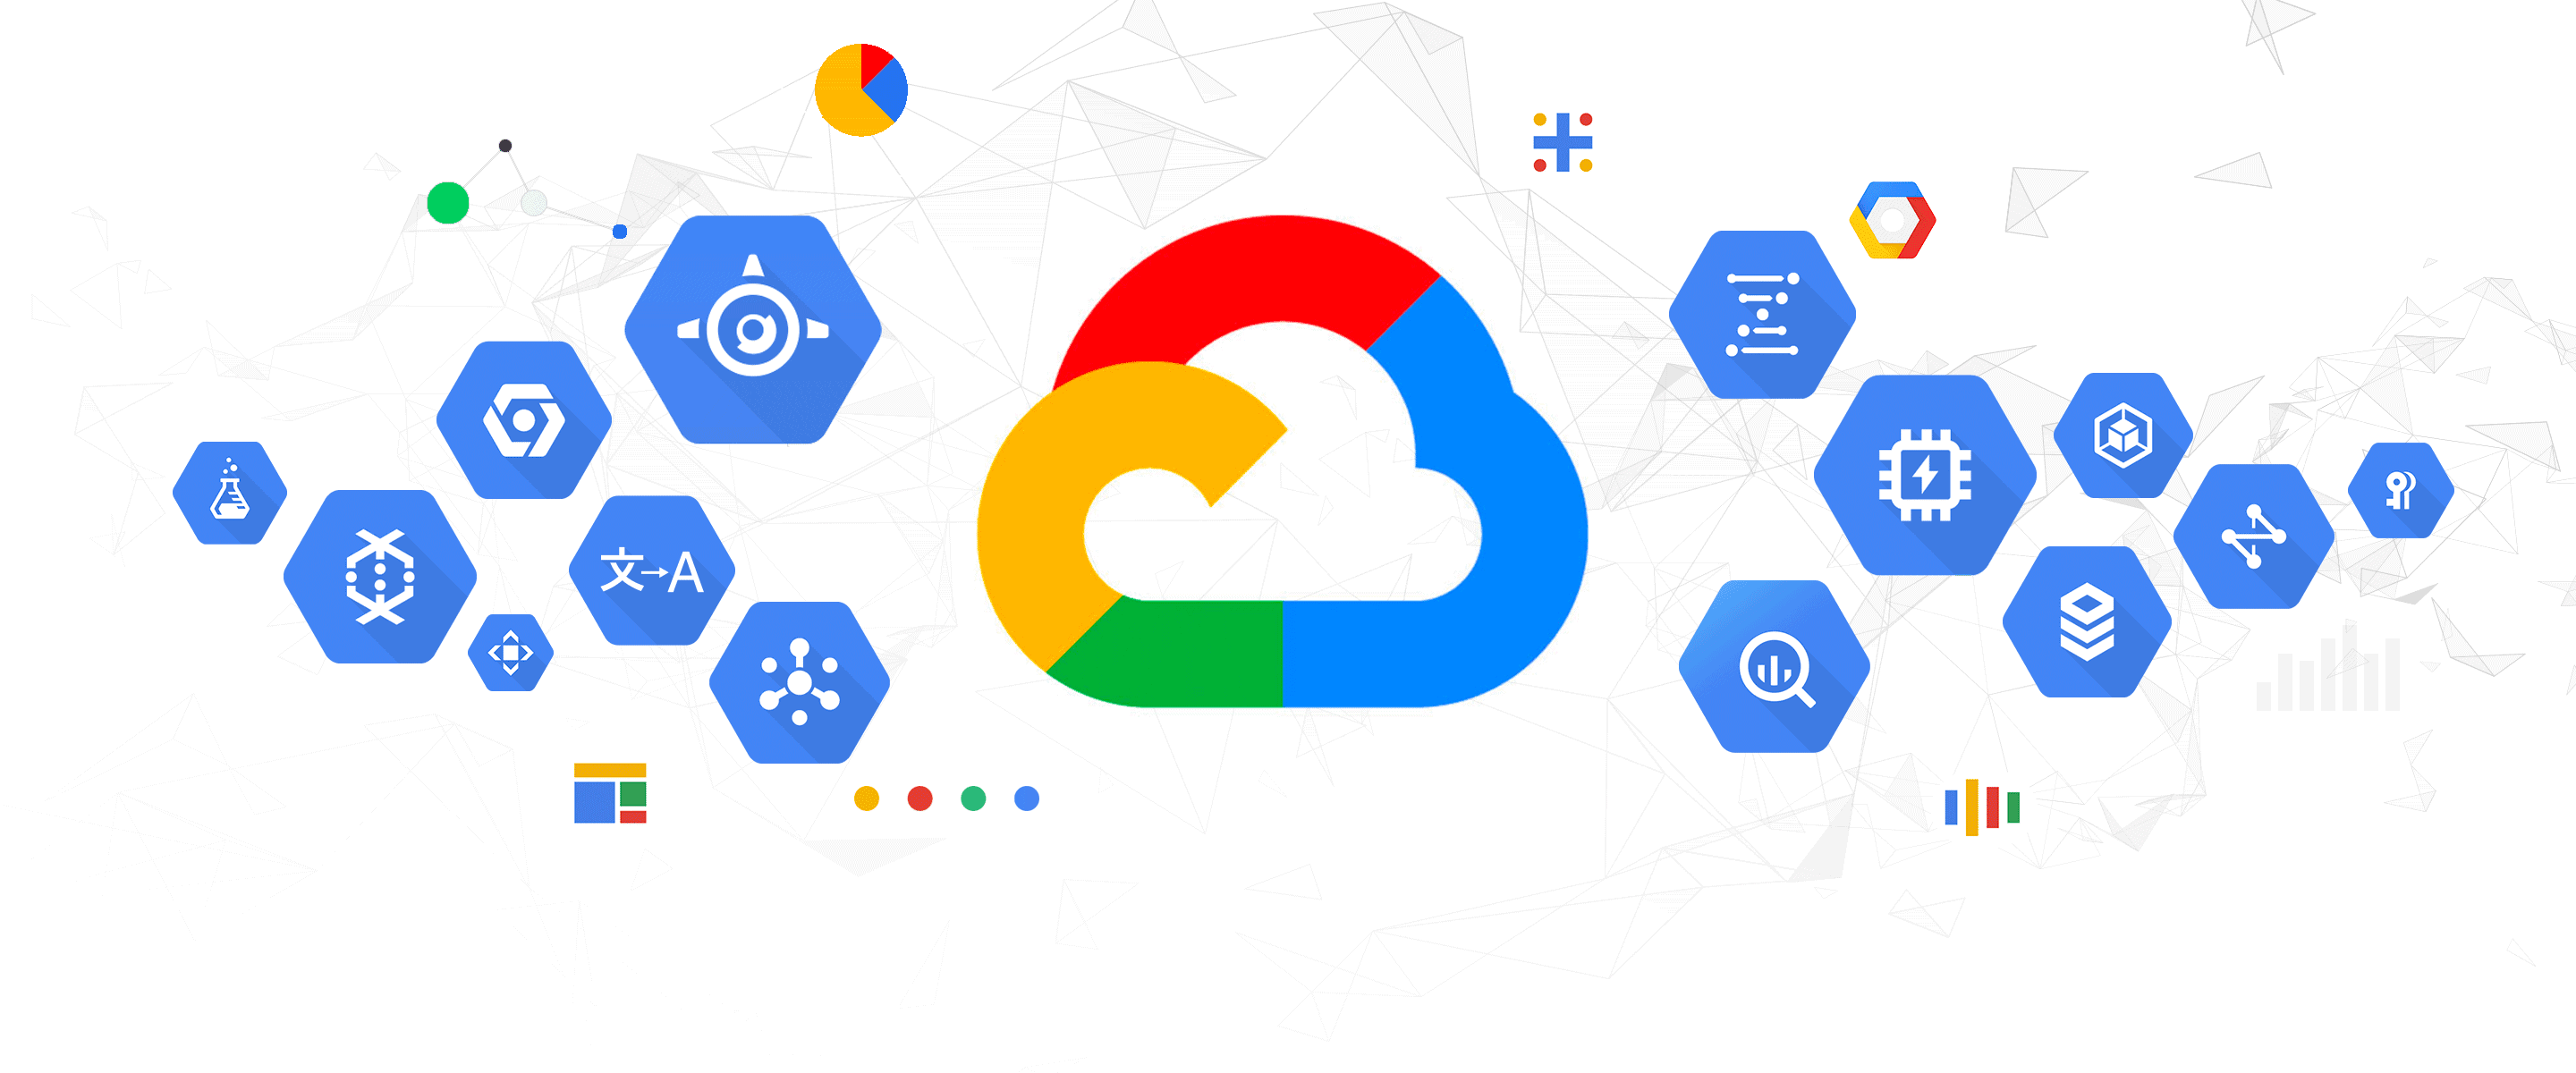 Find out what Google Cloud Platform is and how it works